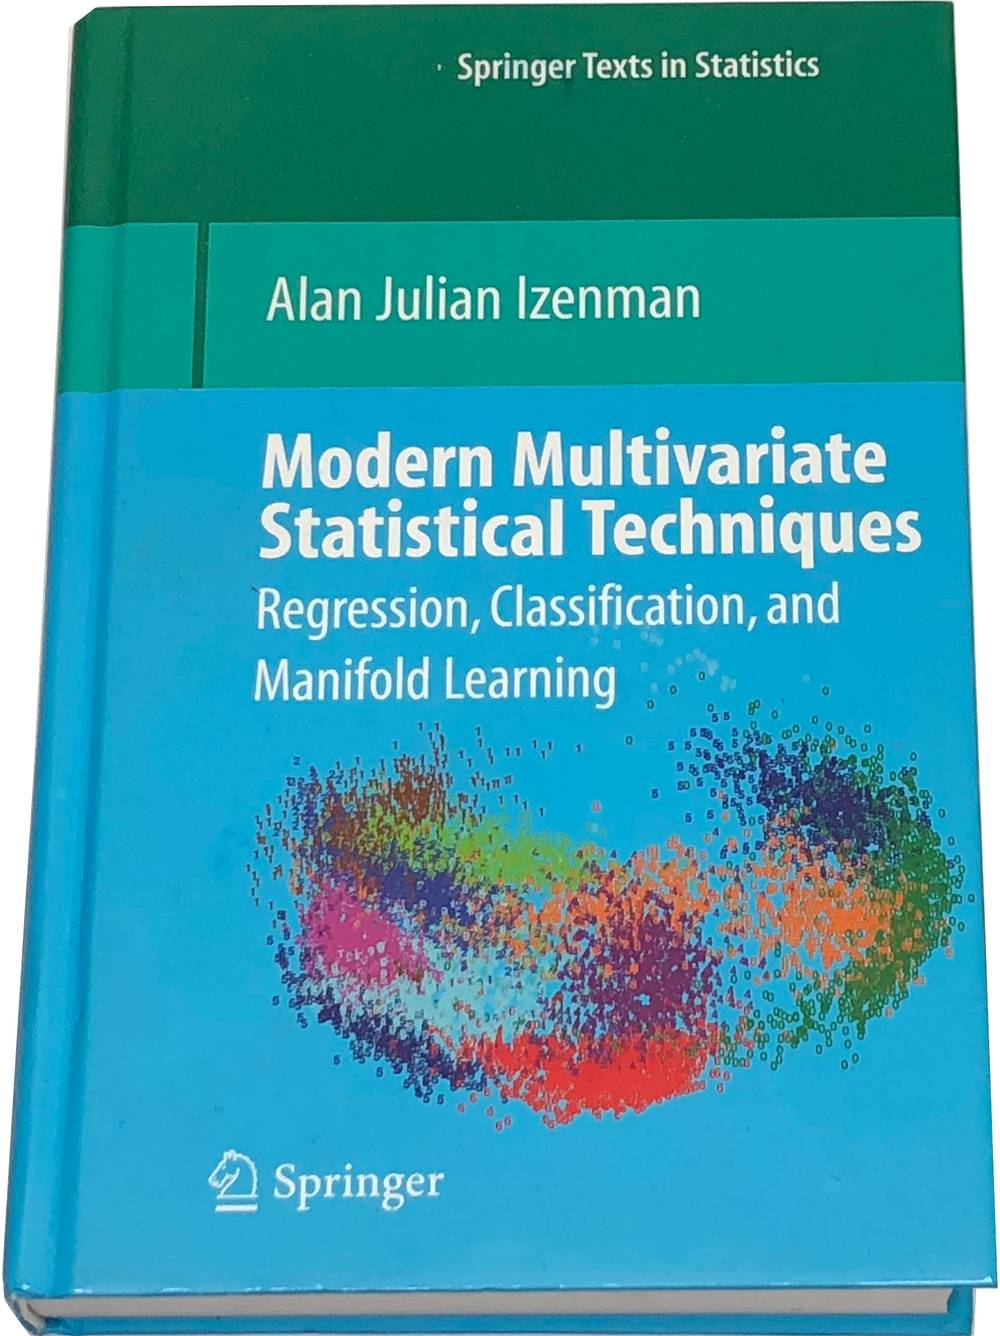 Book image of Modern Multivariate Statistical Techniques: Regression, Classification, and Manifold Learning.